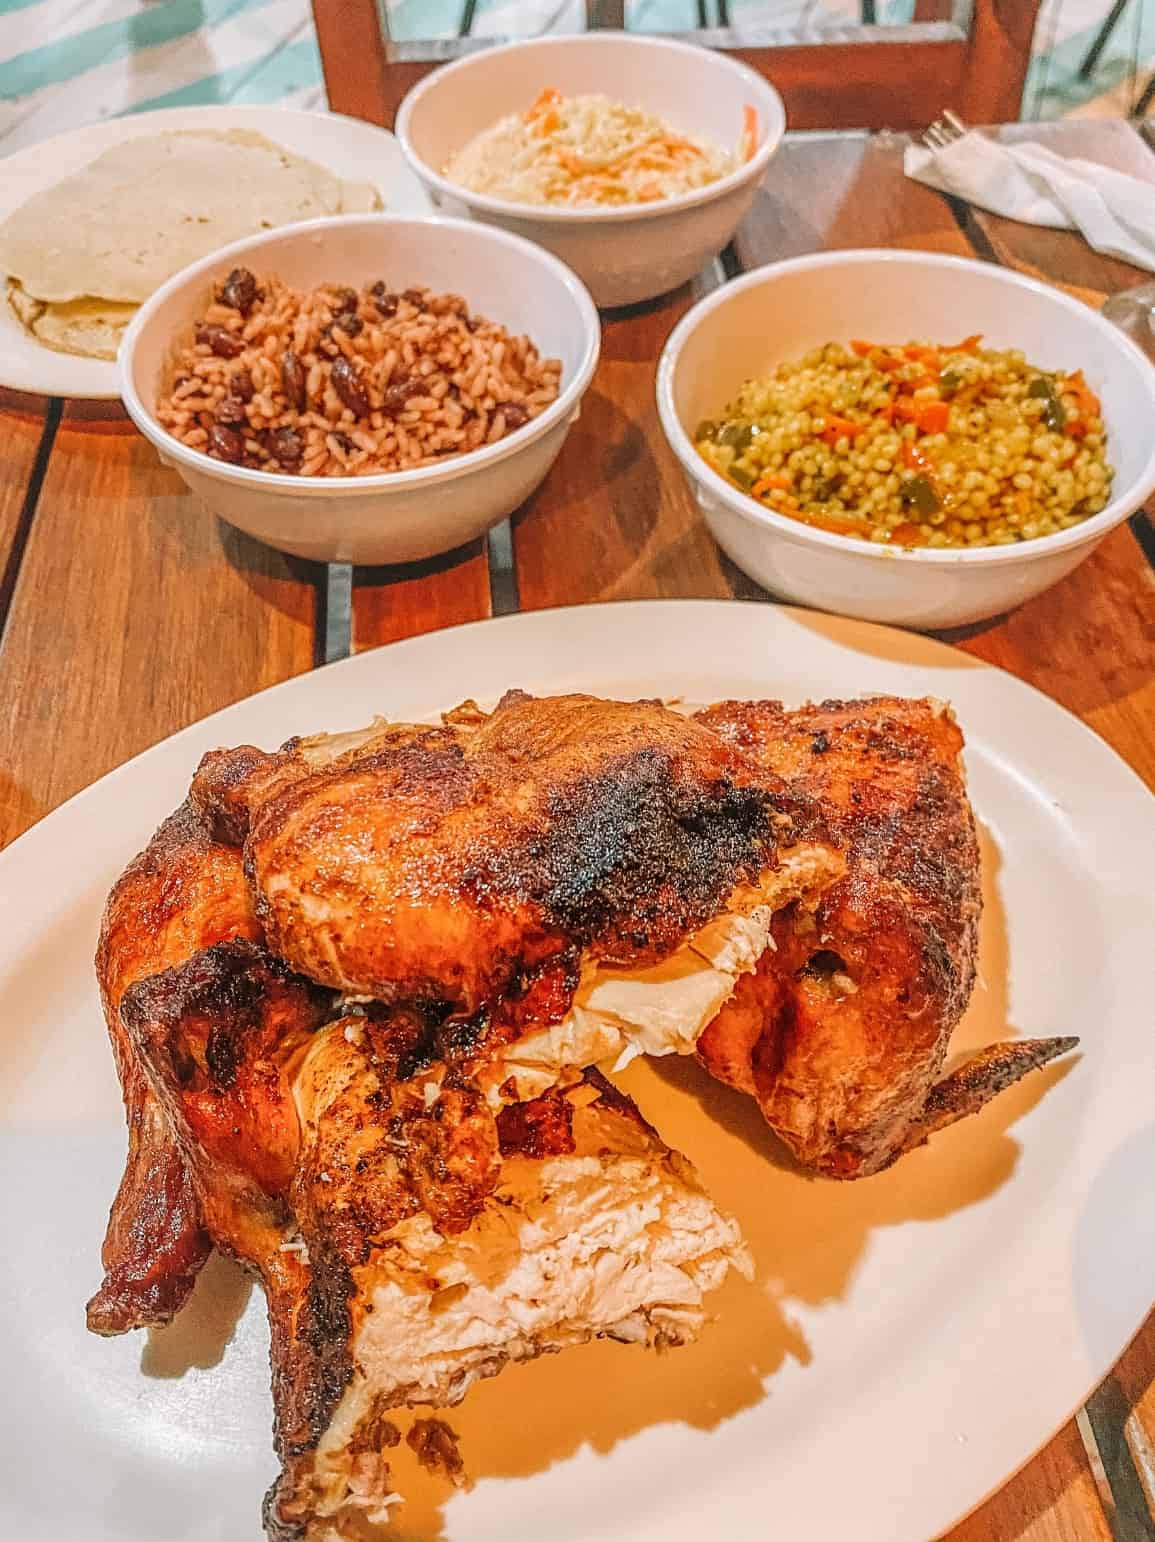 Rotisserie chicken and tasty sides from Creole's Rotisserie